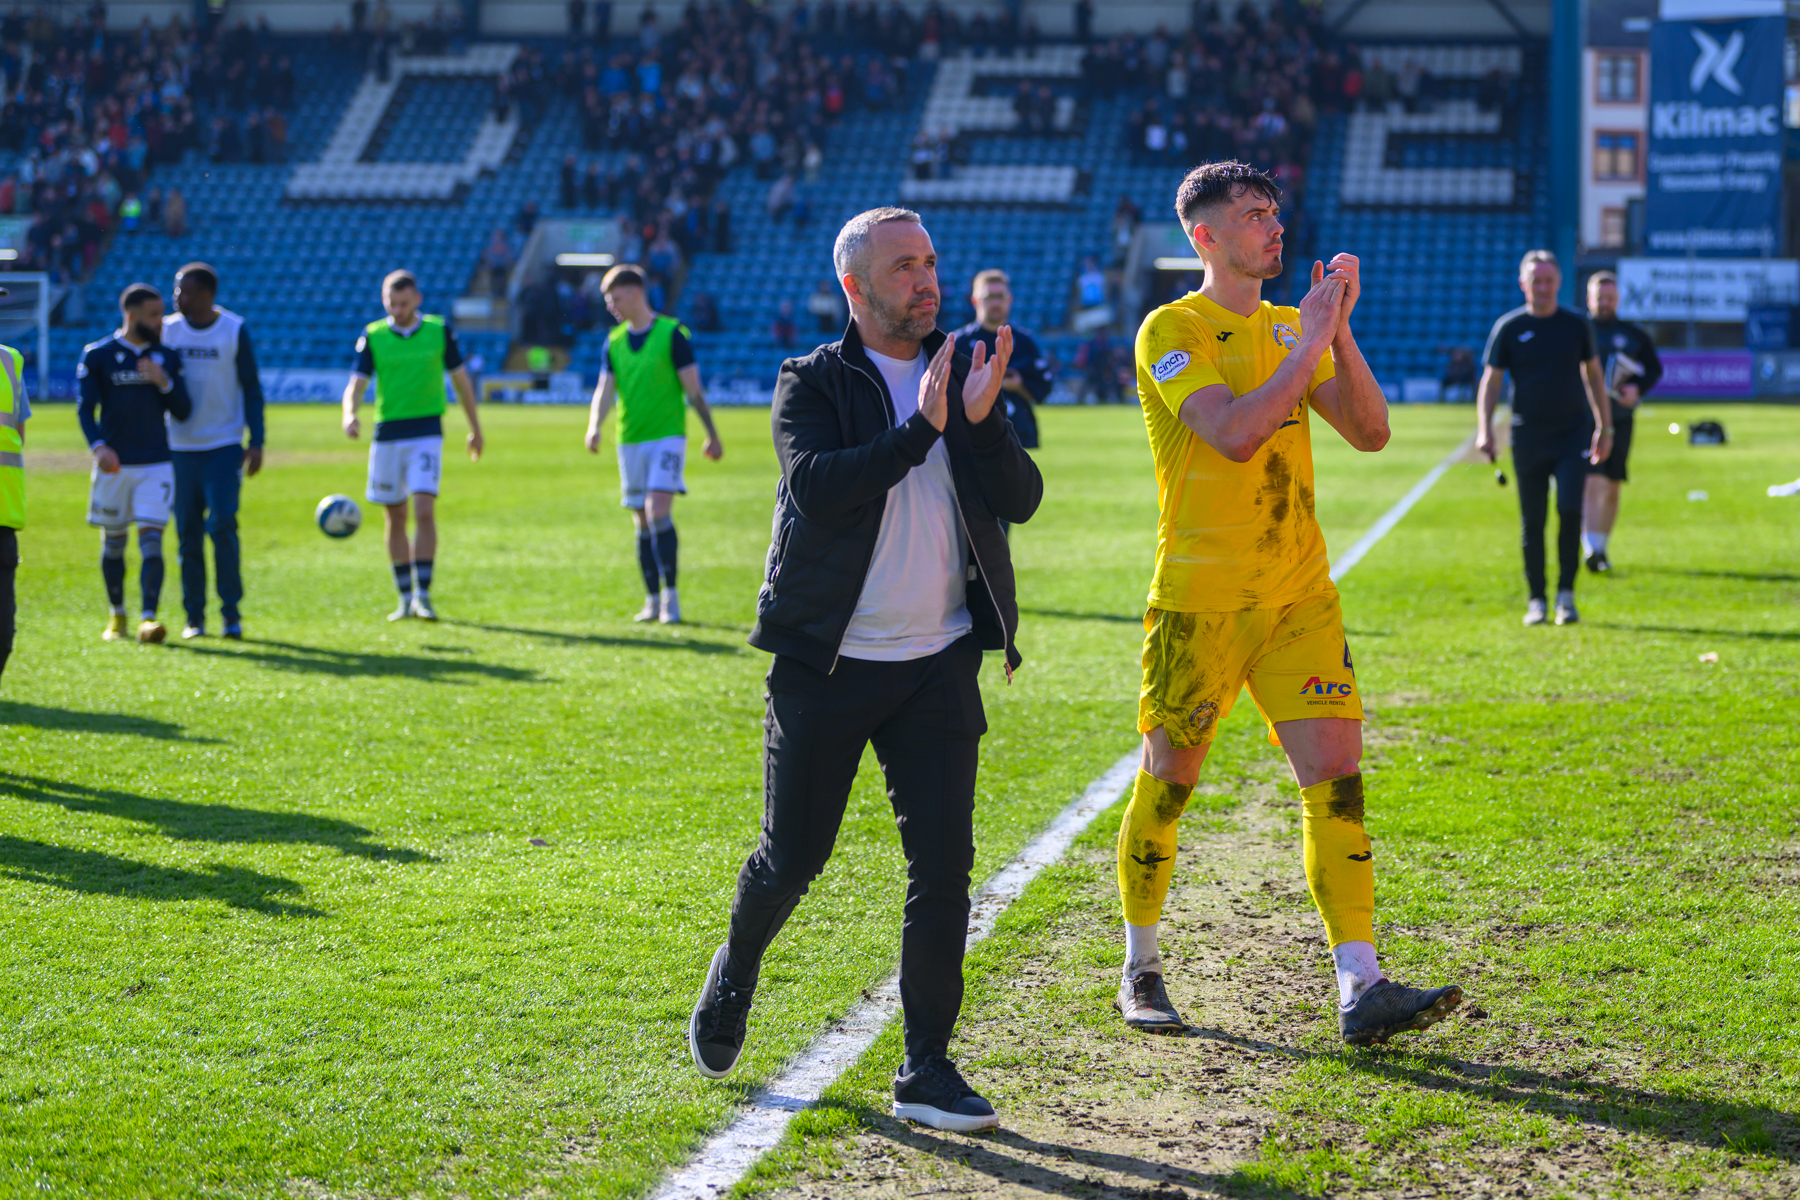 Darragh O'Connor says manager right to slam Dundee collapse